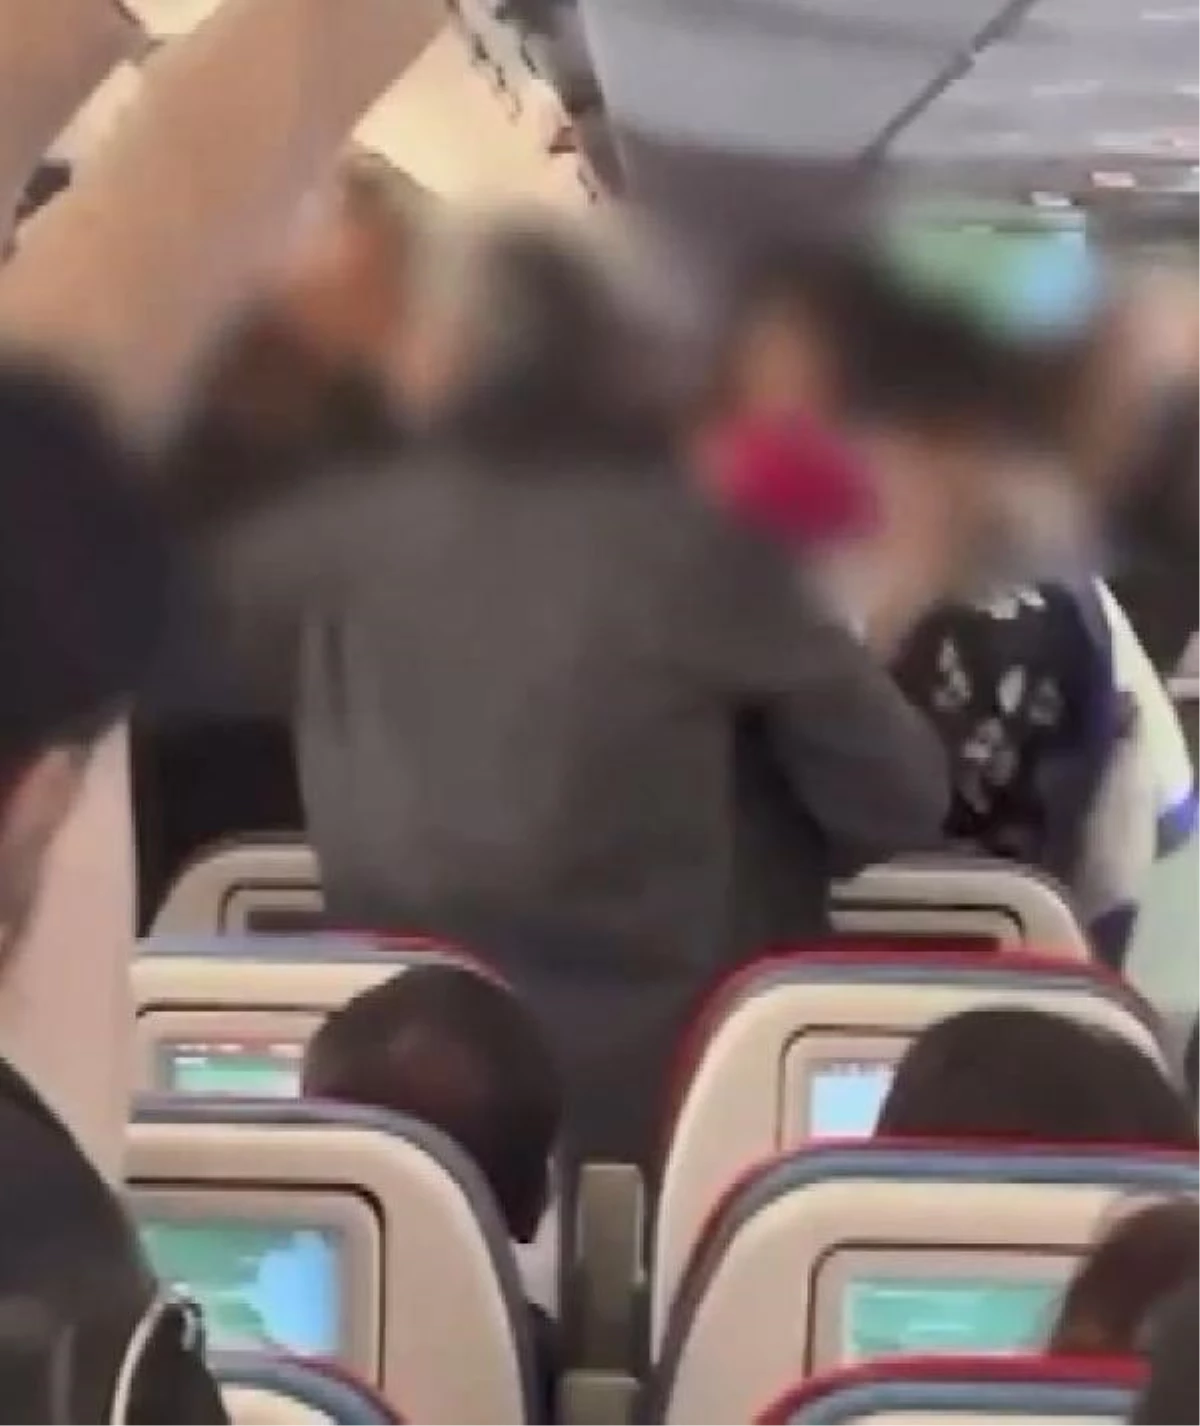 The brawl on the plane is on camera